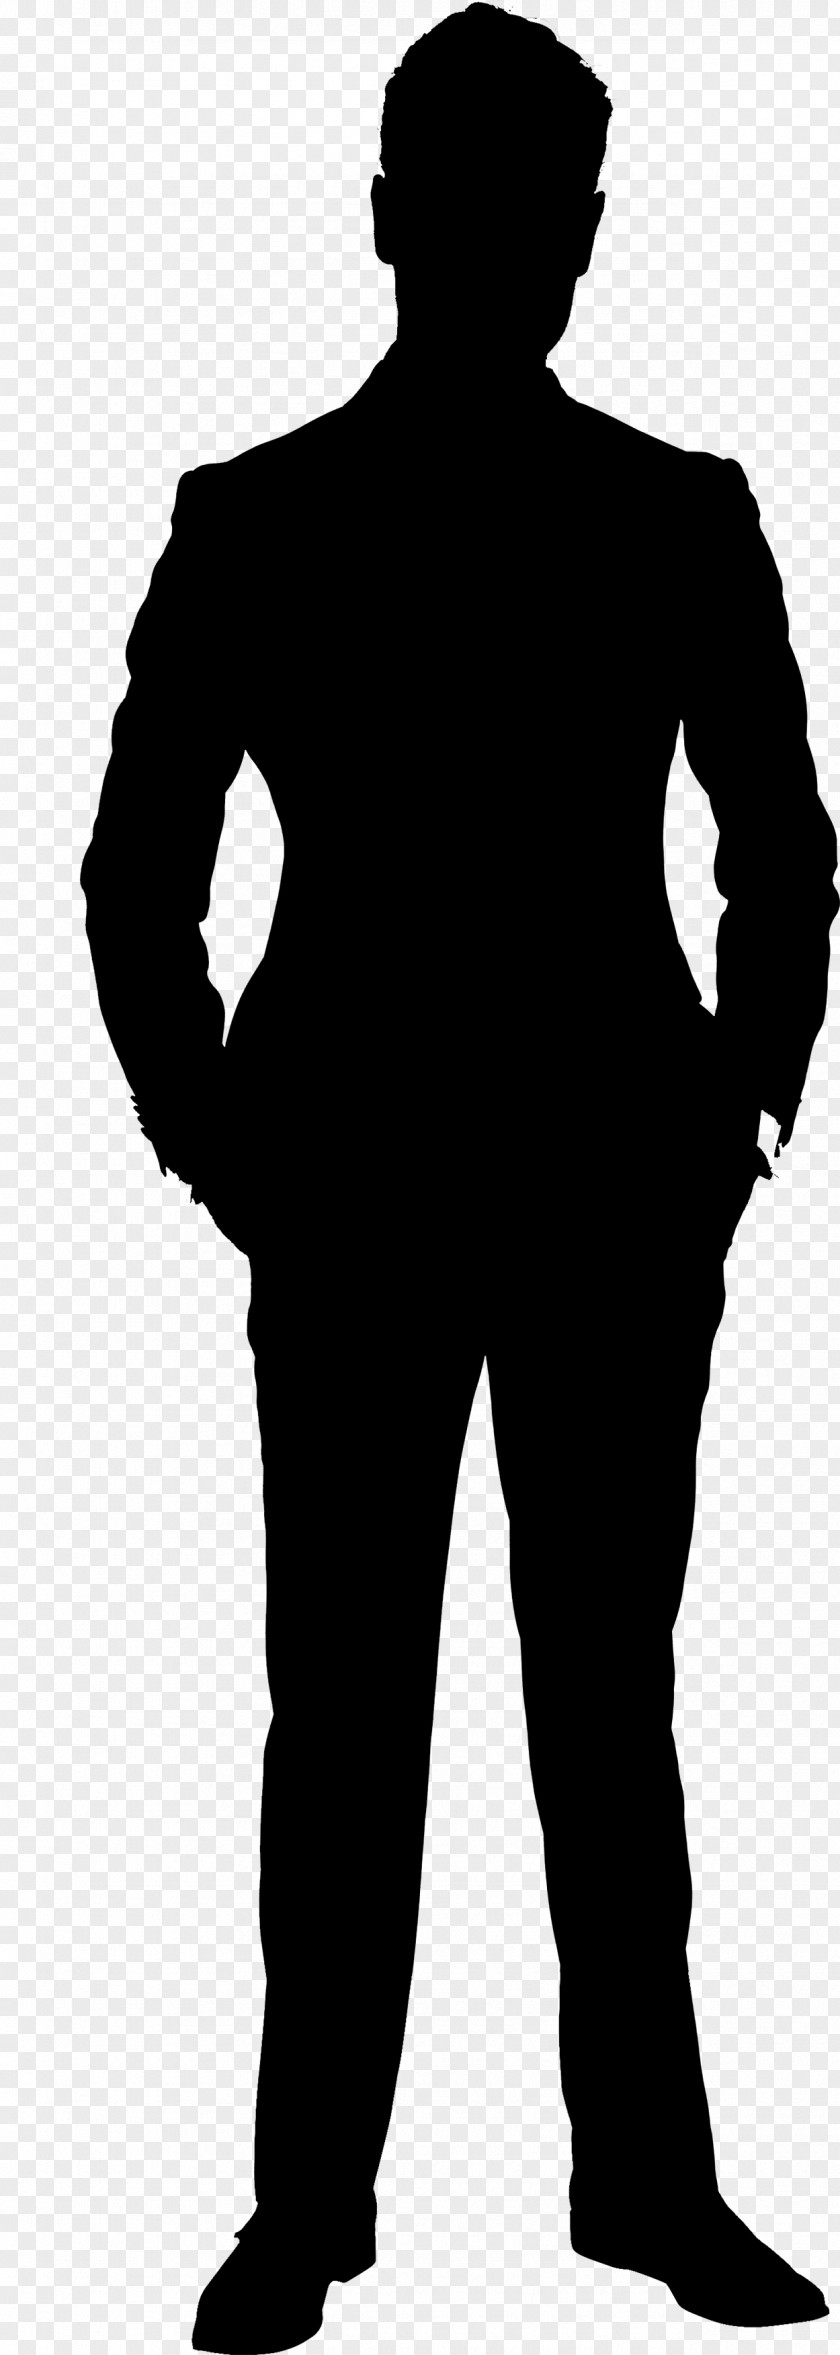 Man Silhouette Suit Image PNG